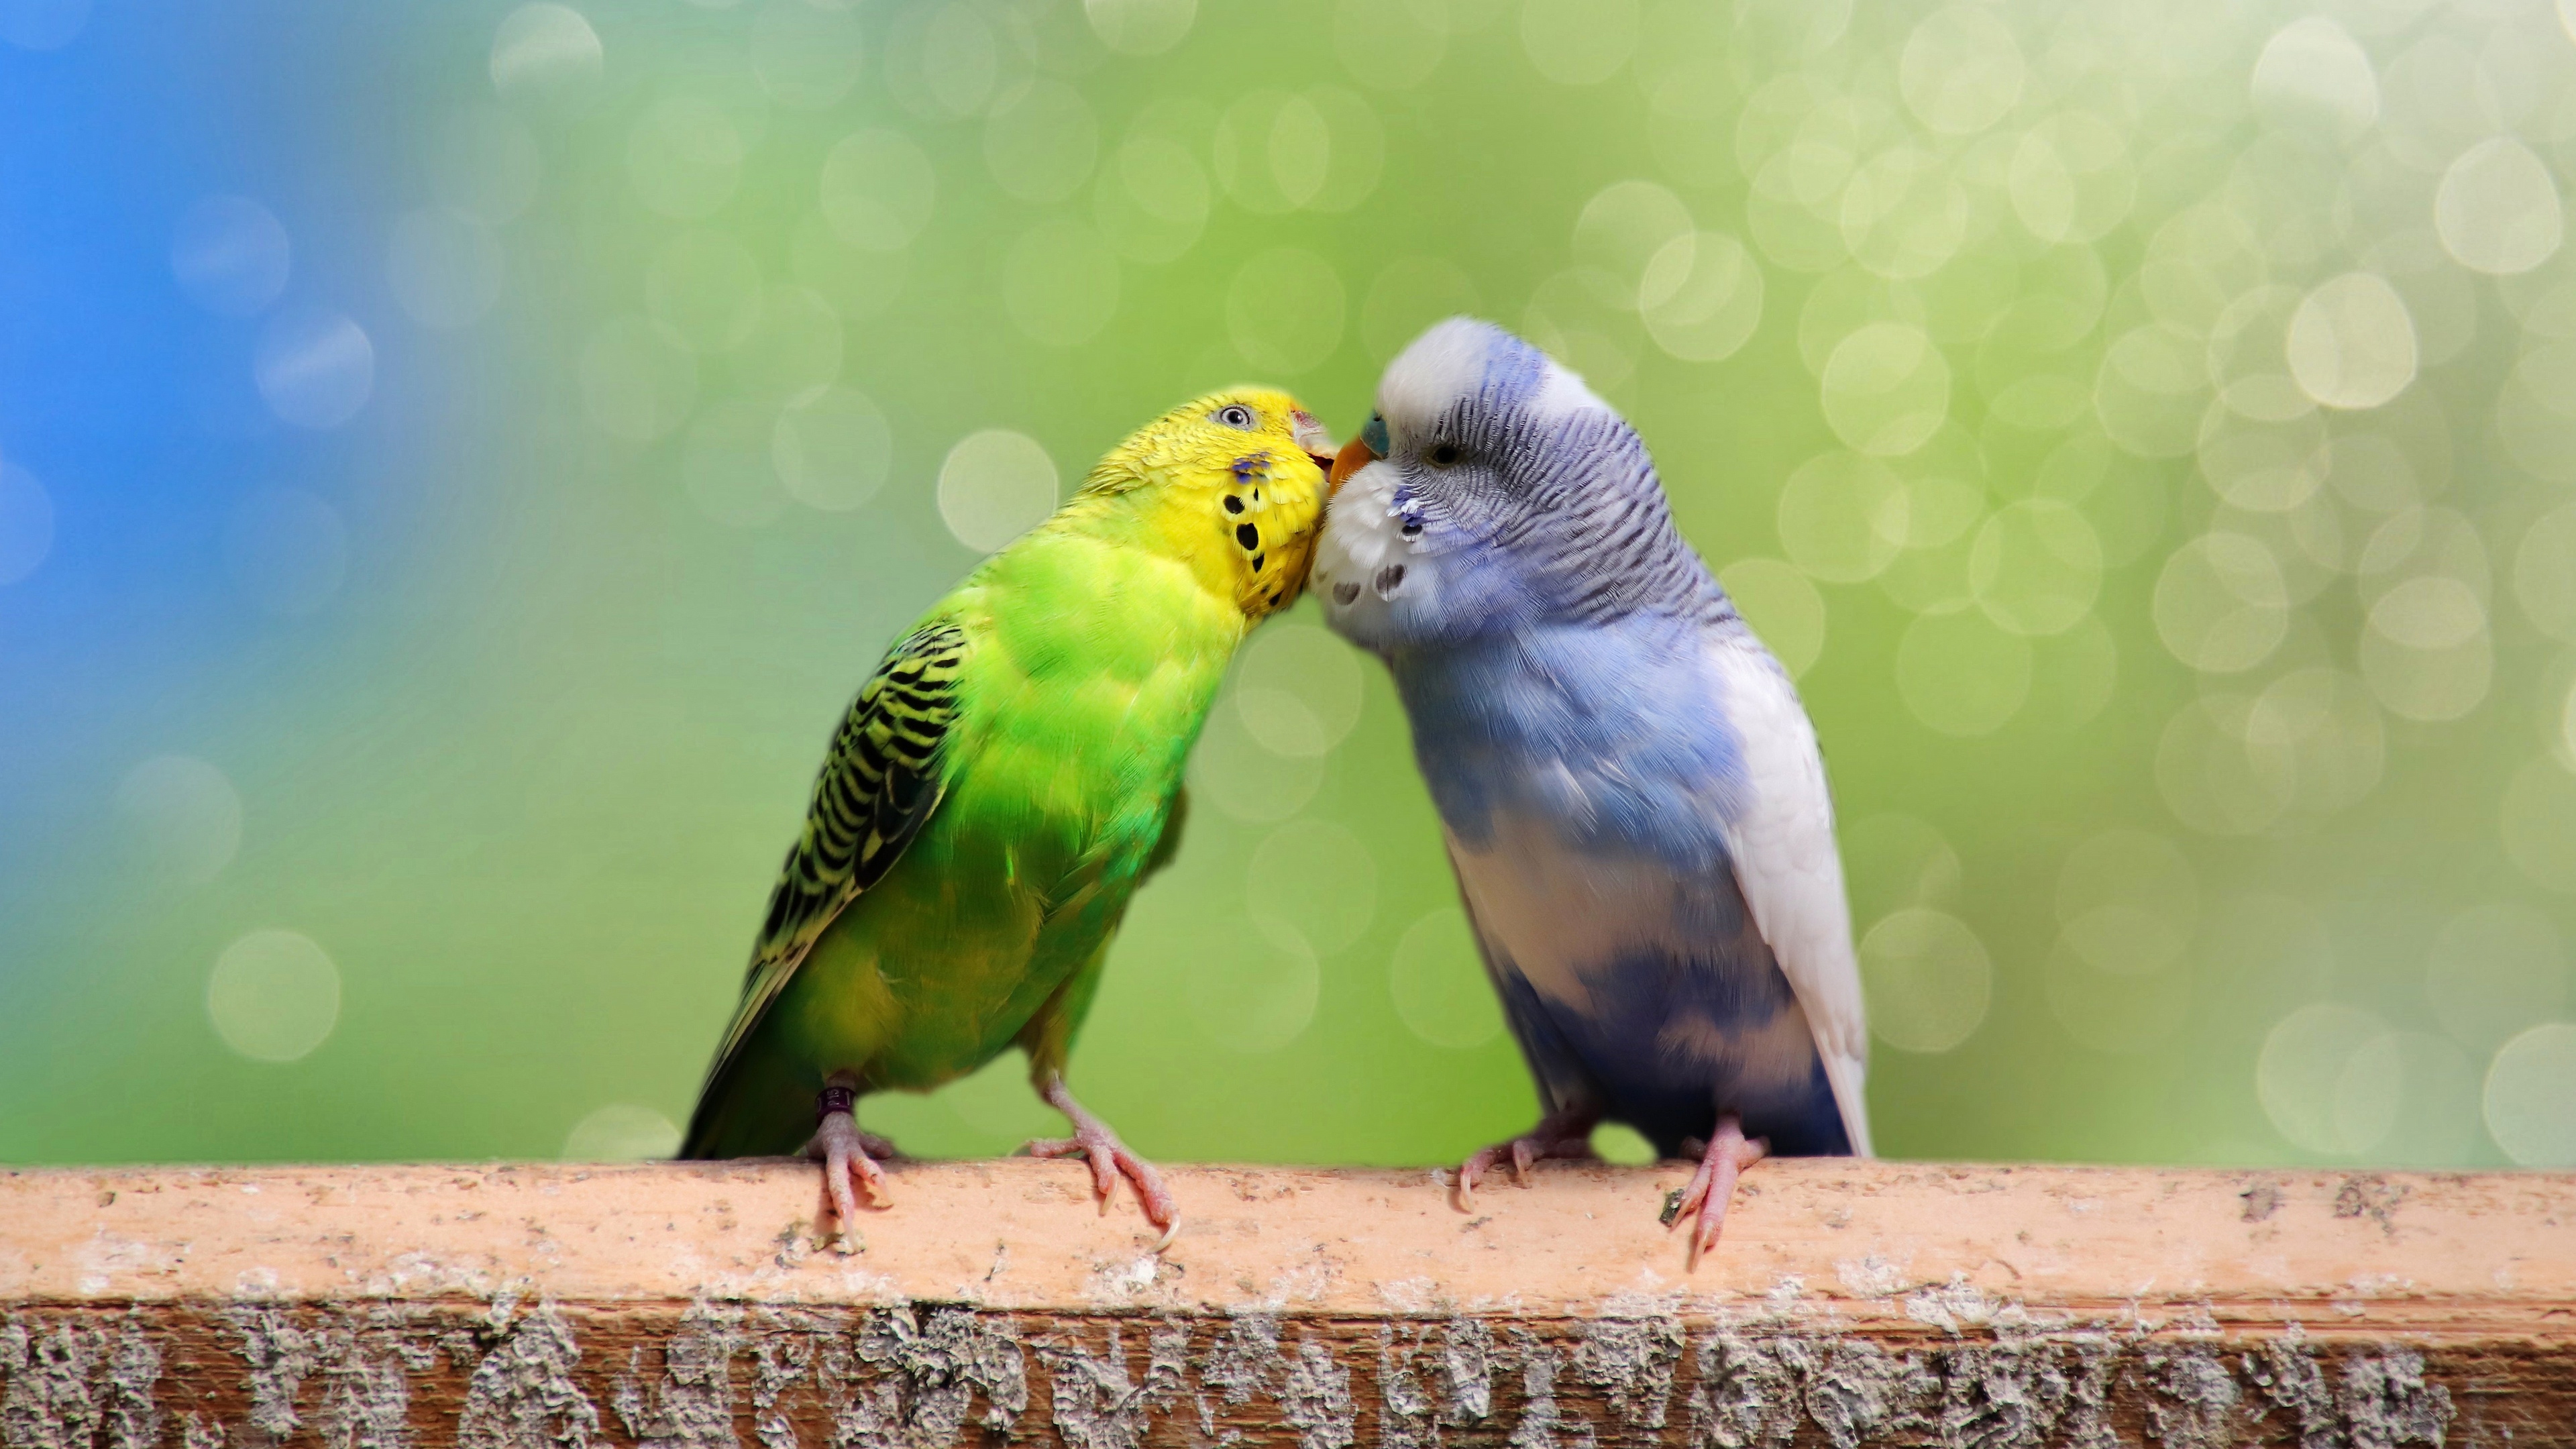 Free photo A pair of wavy parrots kissing on a blurry background